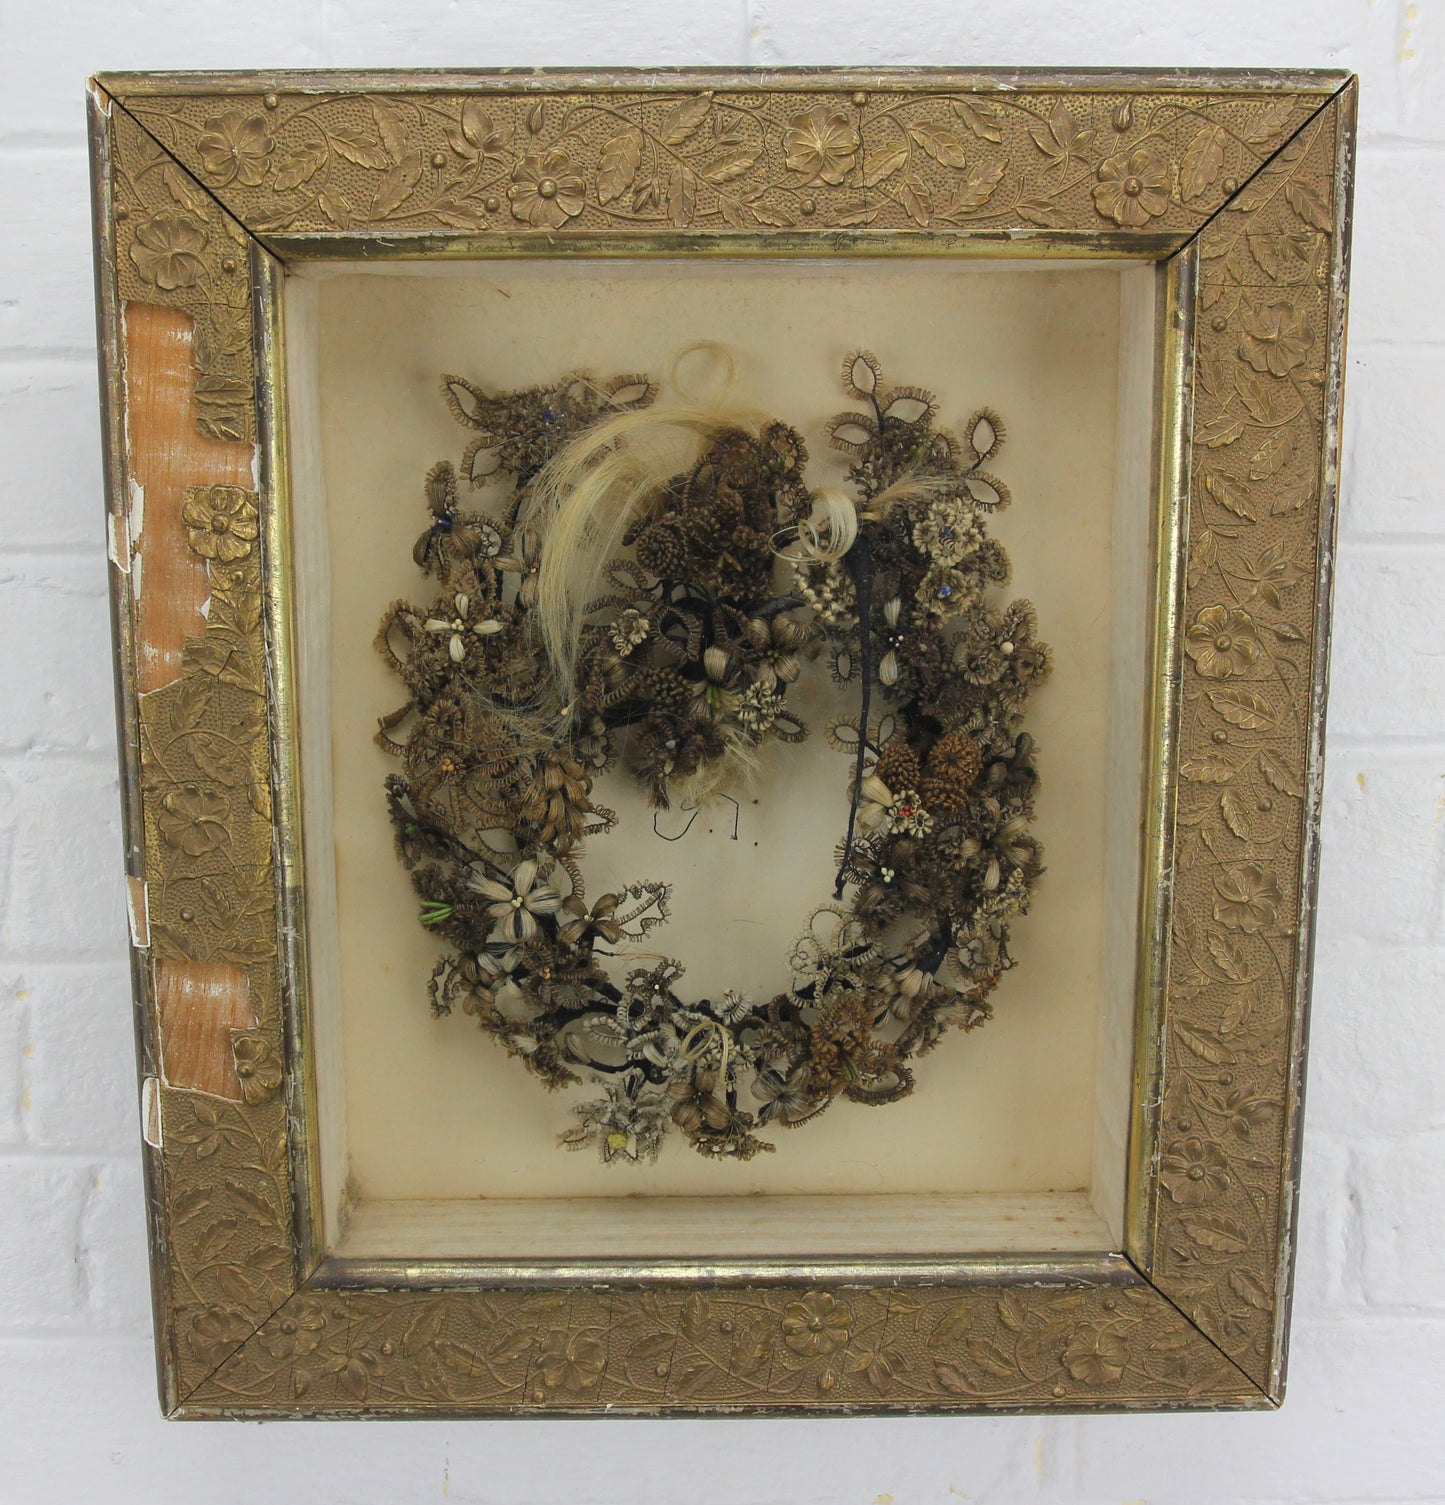 Victorian Mourning Human Hair Wreath in Shadowbox Frame - 13.5 x 15.5"